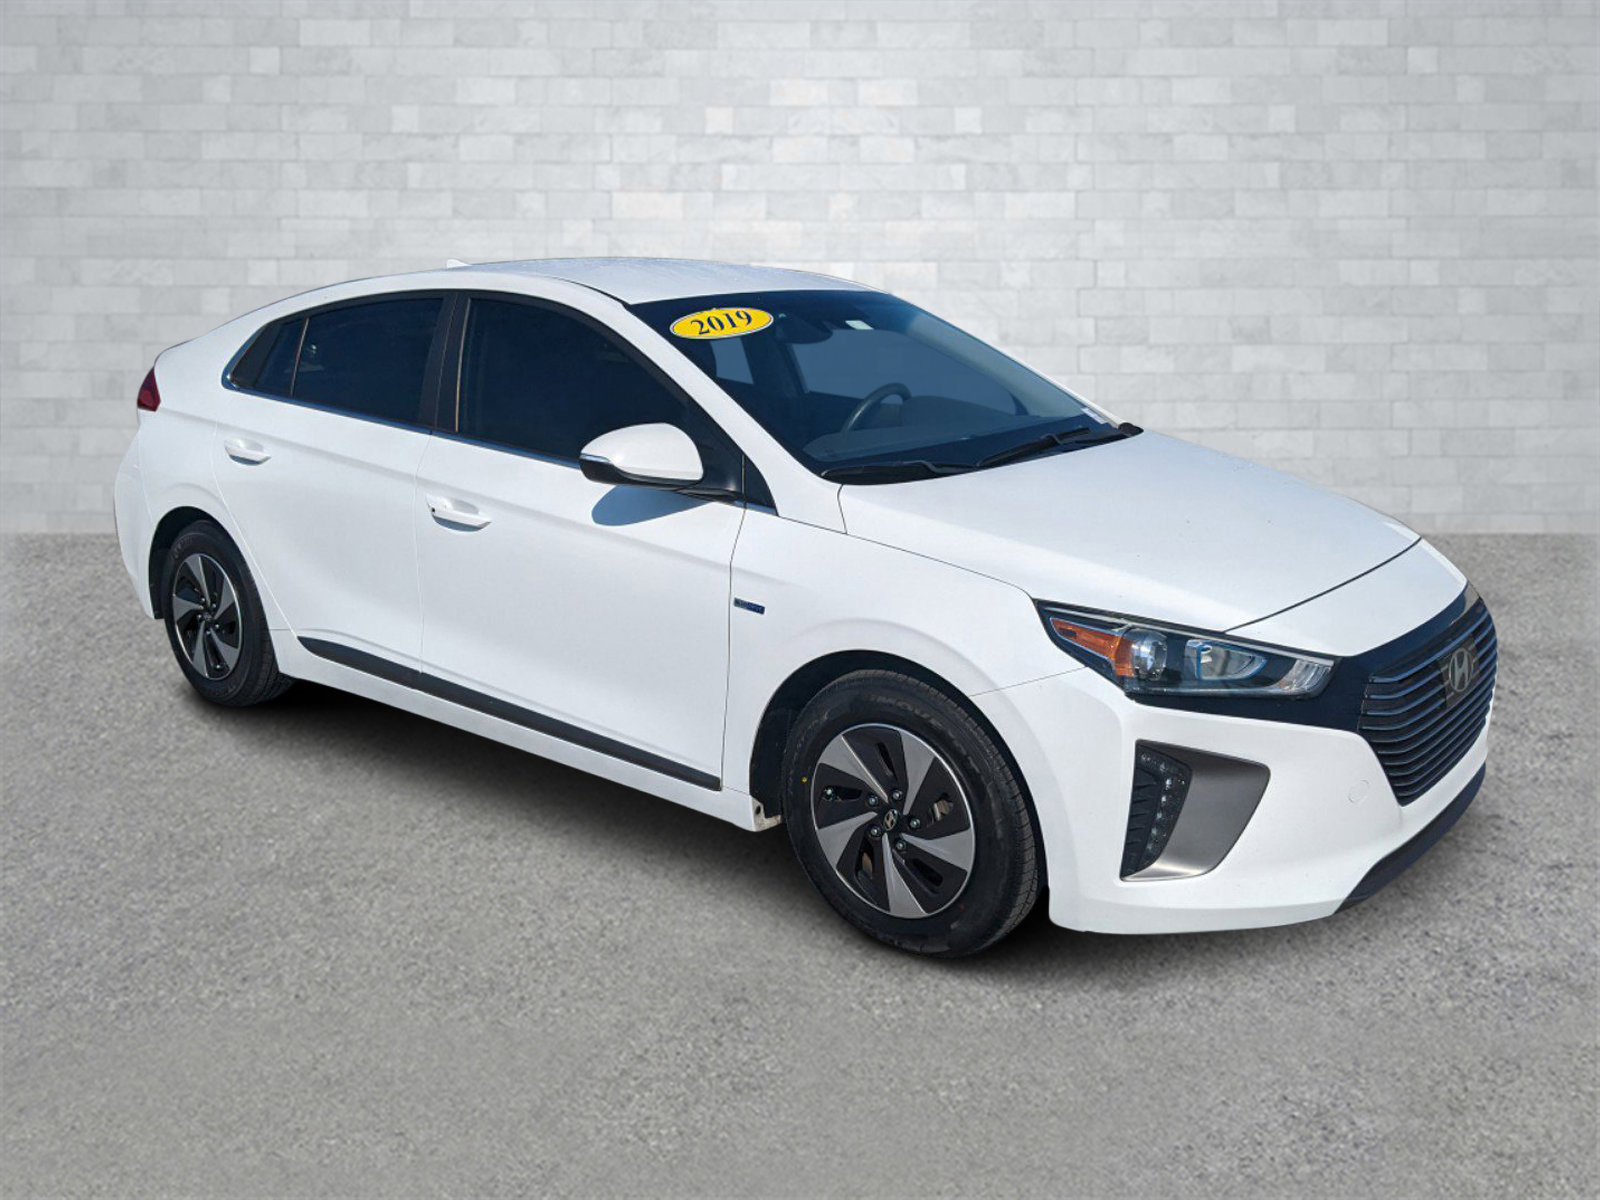 Certified Pre-Owned 2019 Hyundai Ioniq Hybrid SEL Hatchback in Fort Myers  #CH45205 | Hyundai of Fort Myers